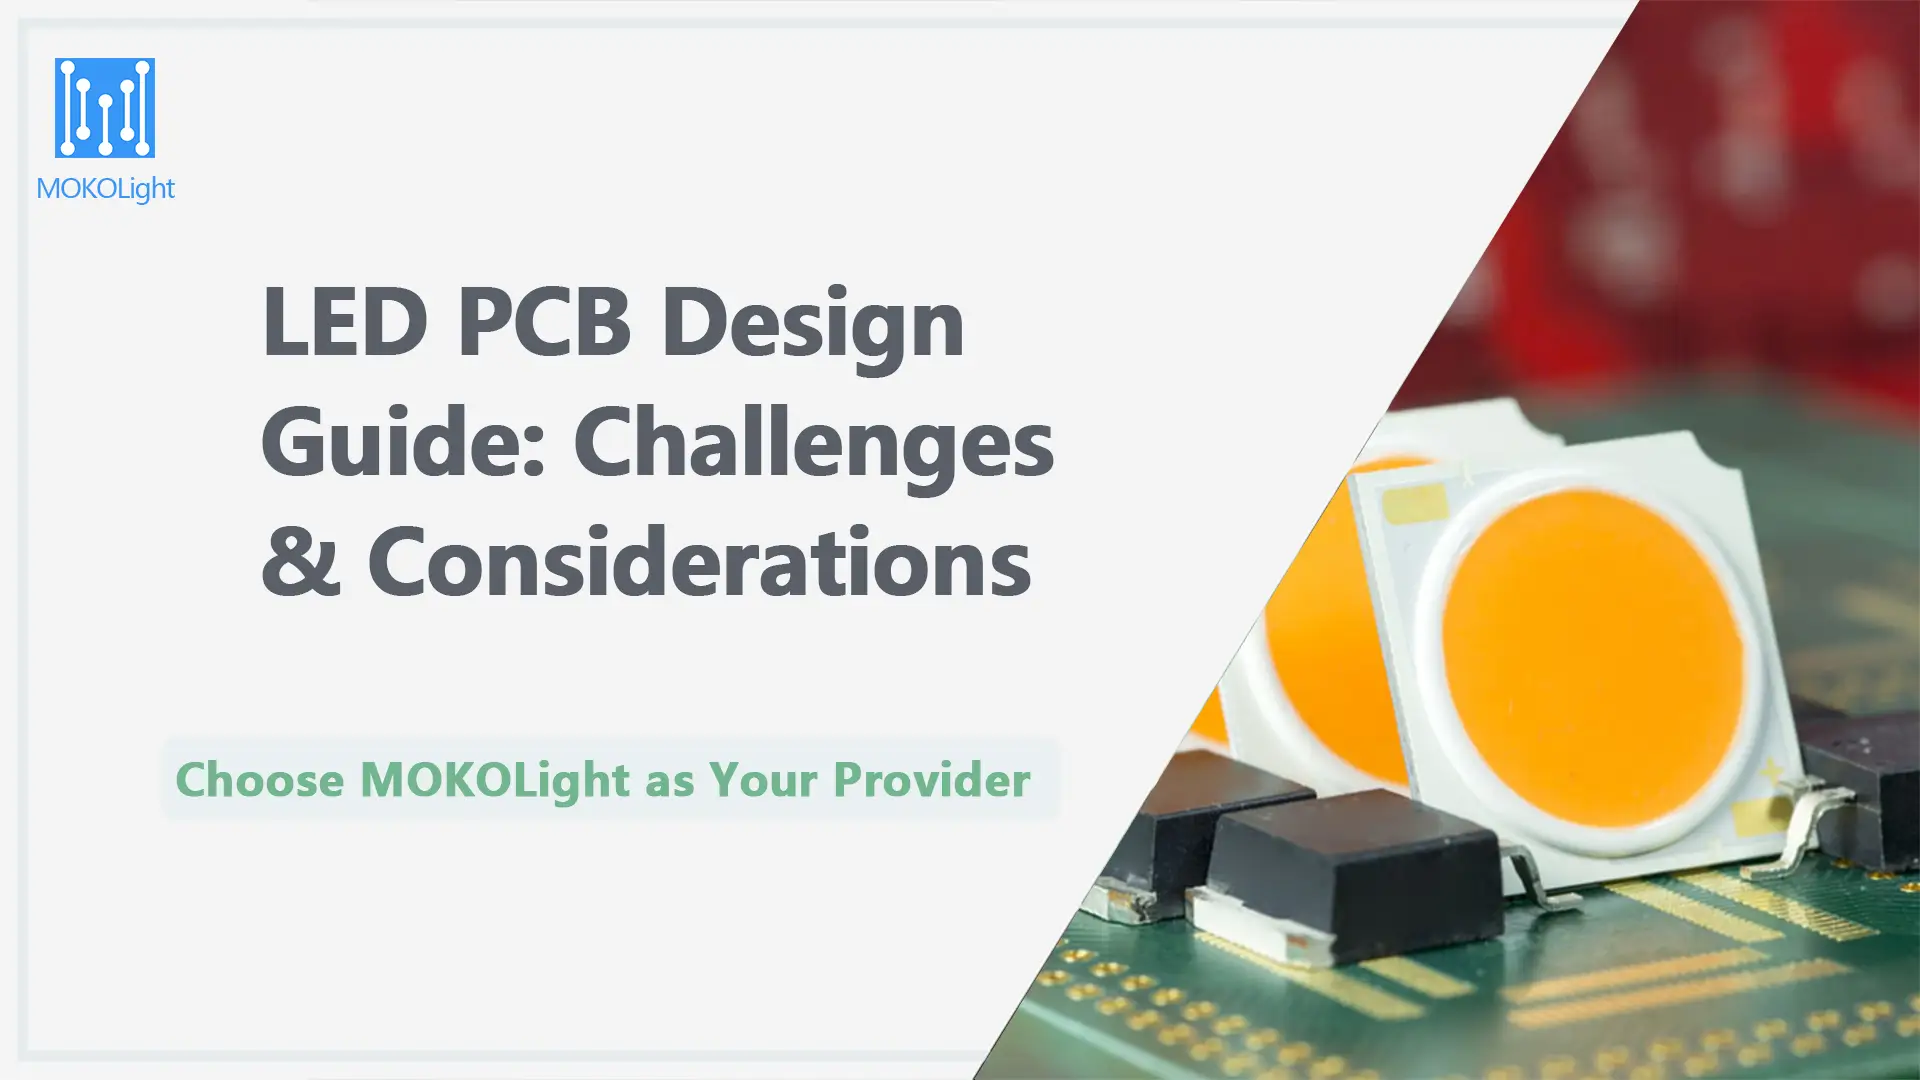 LED PCB Design Guide Challenges & Considerations